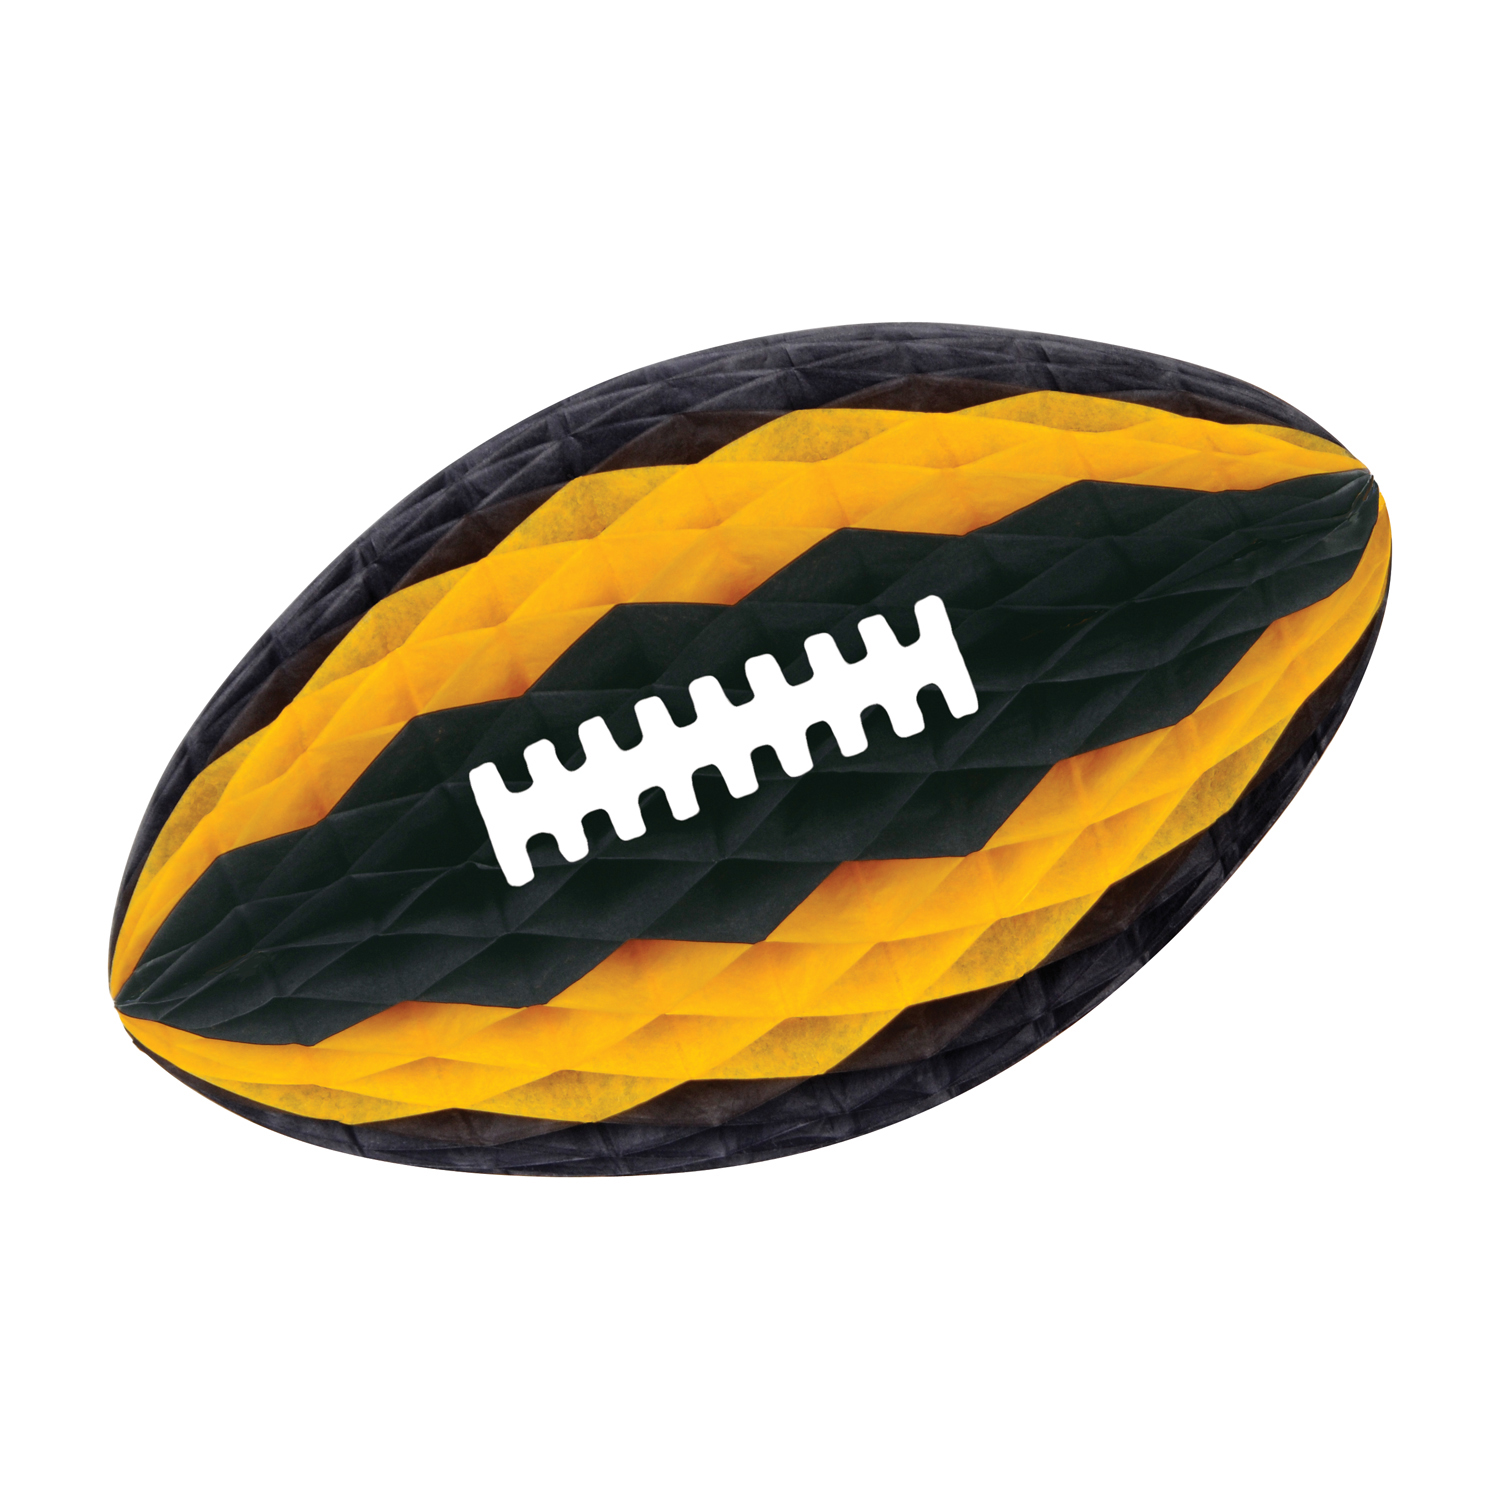 Pkgd Tissue FOOTBALL w/Laces